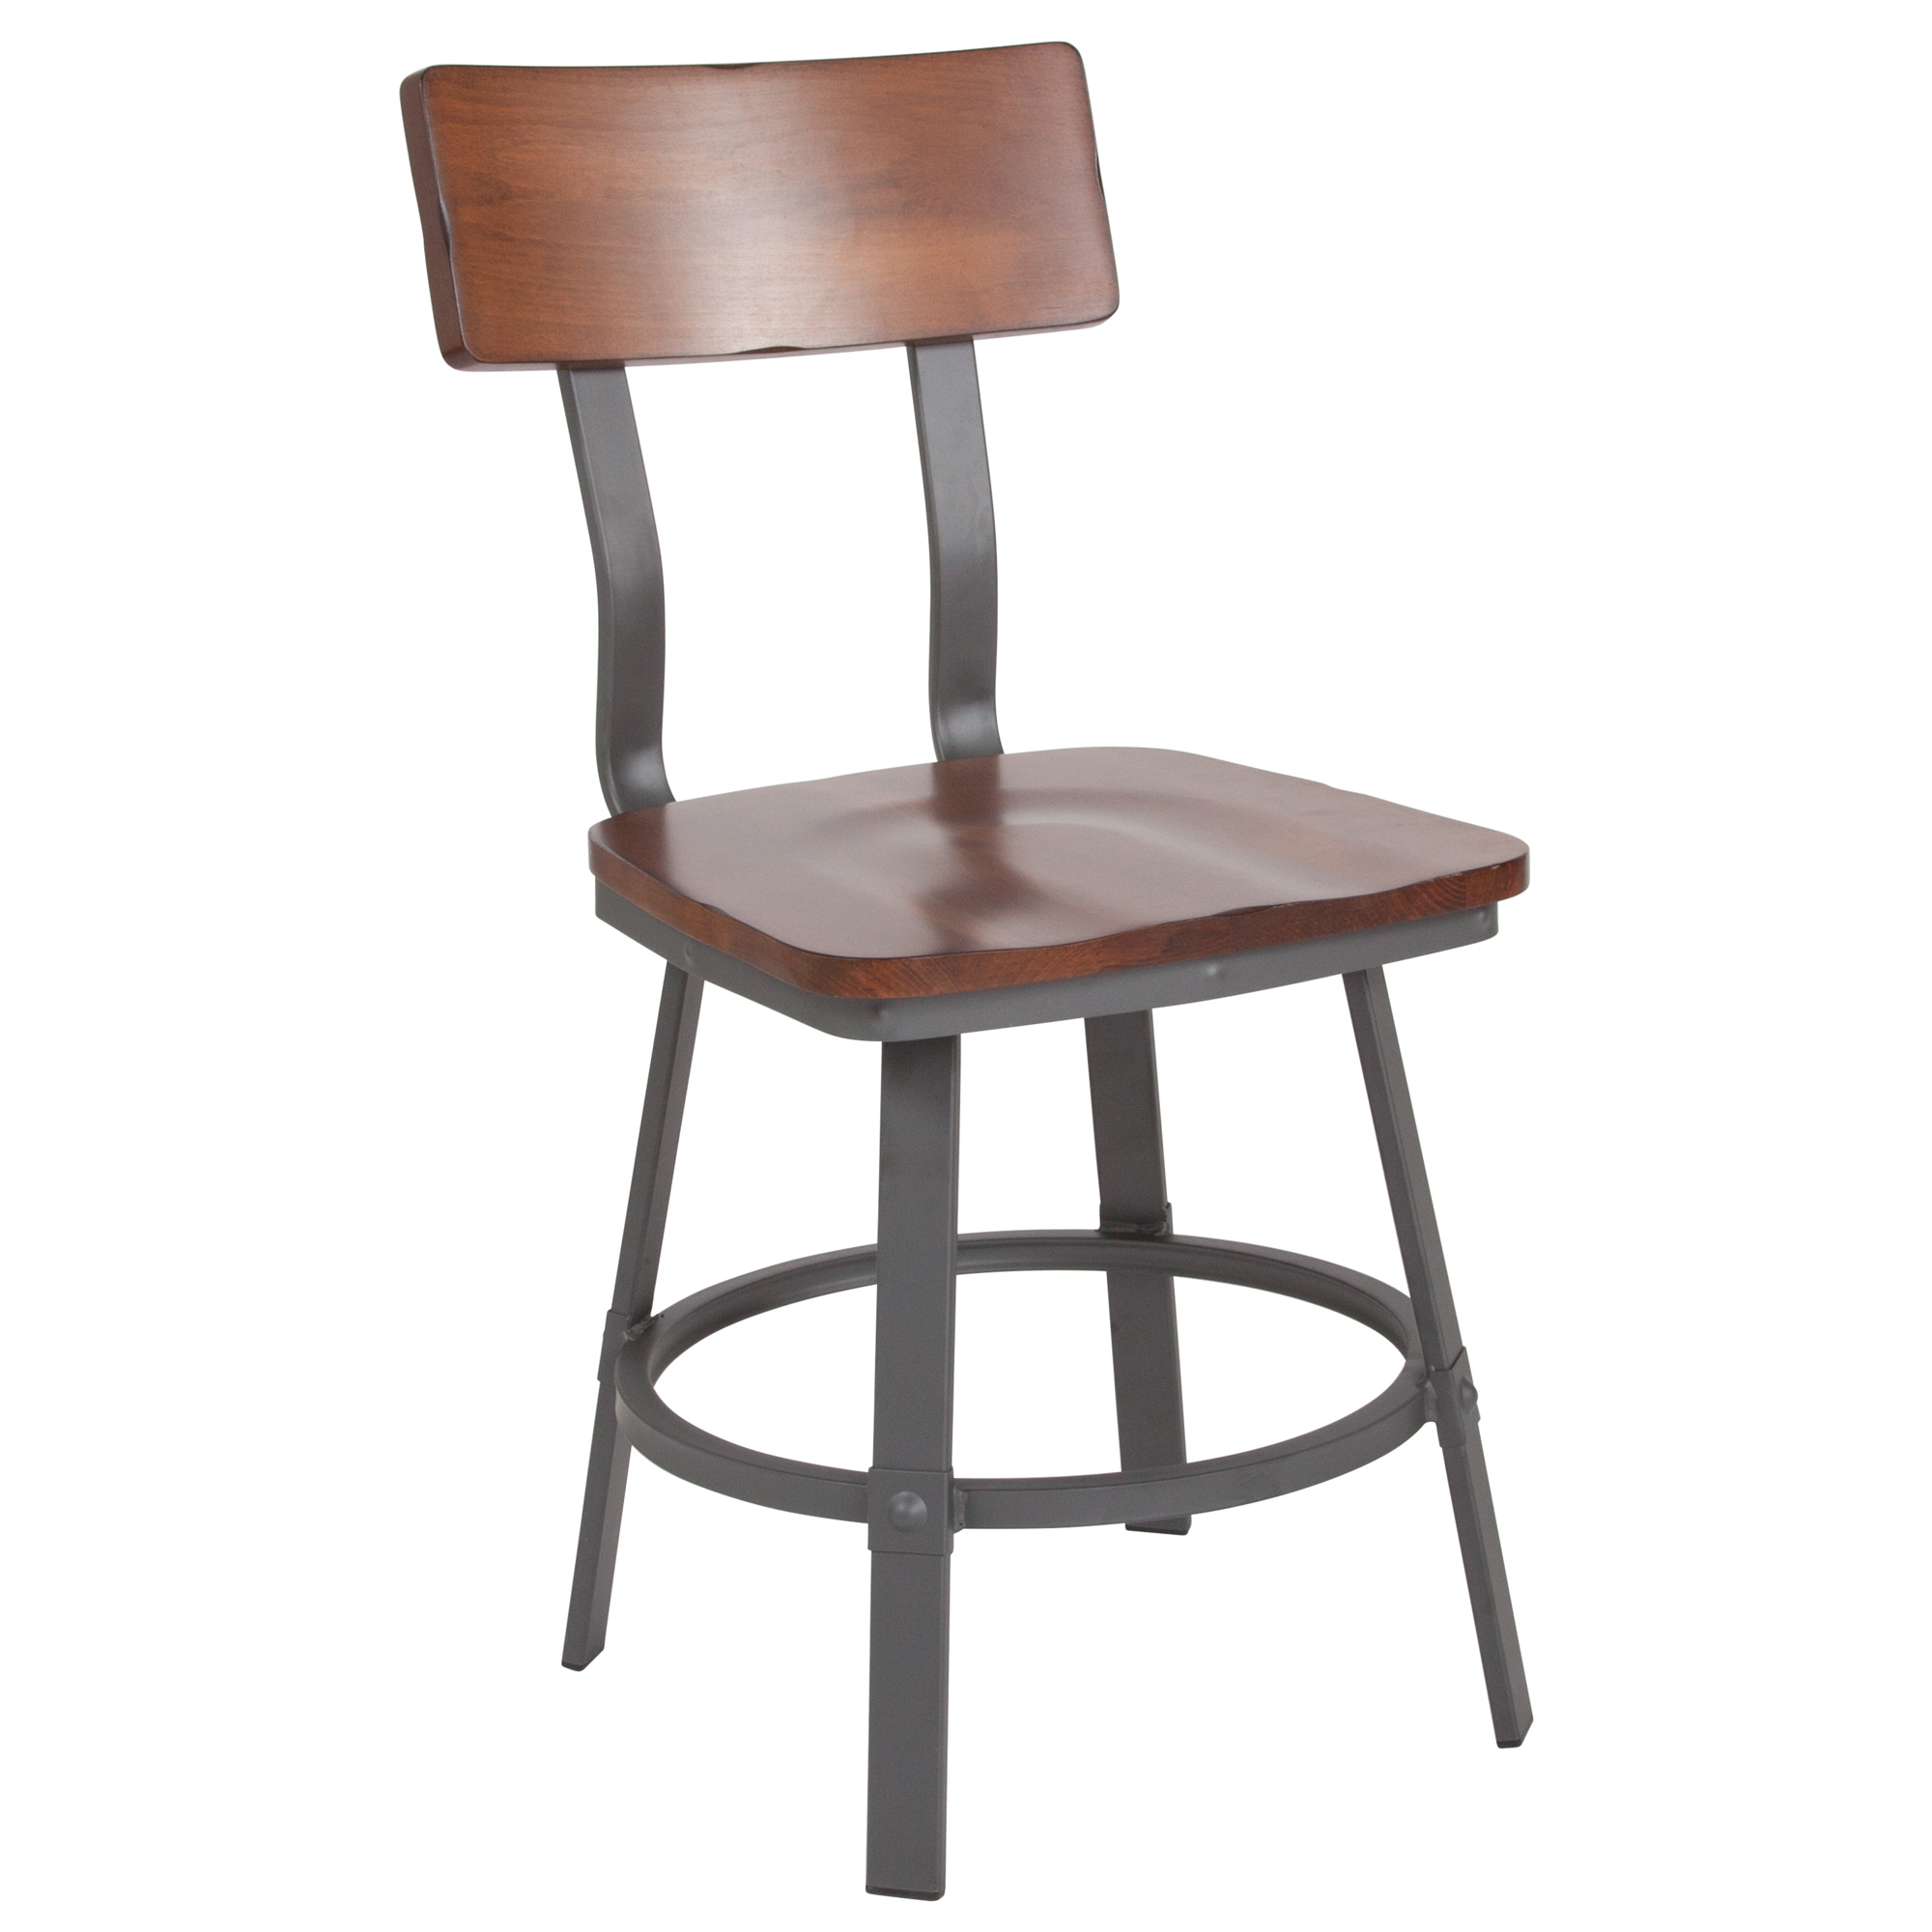 Flash Furniture, Rustic Walnut Chair with Wood Seat Back, Primary Color Brown, Included (qty.) 1, Model XUDG60582